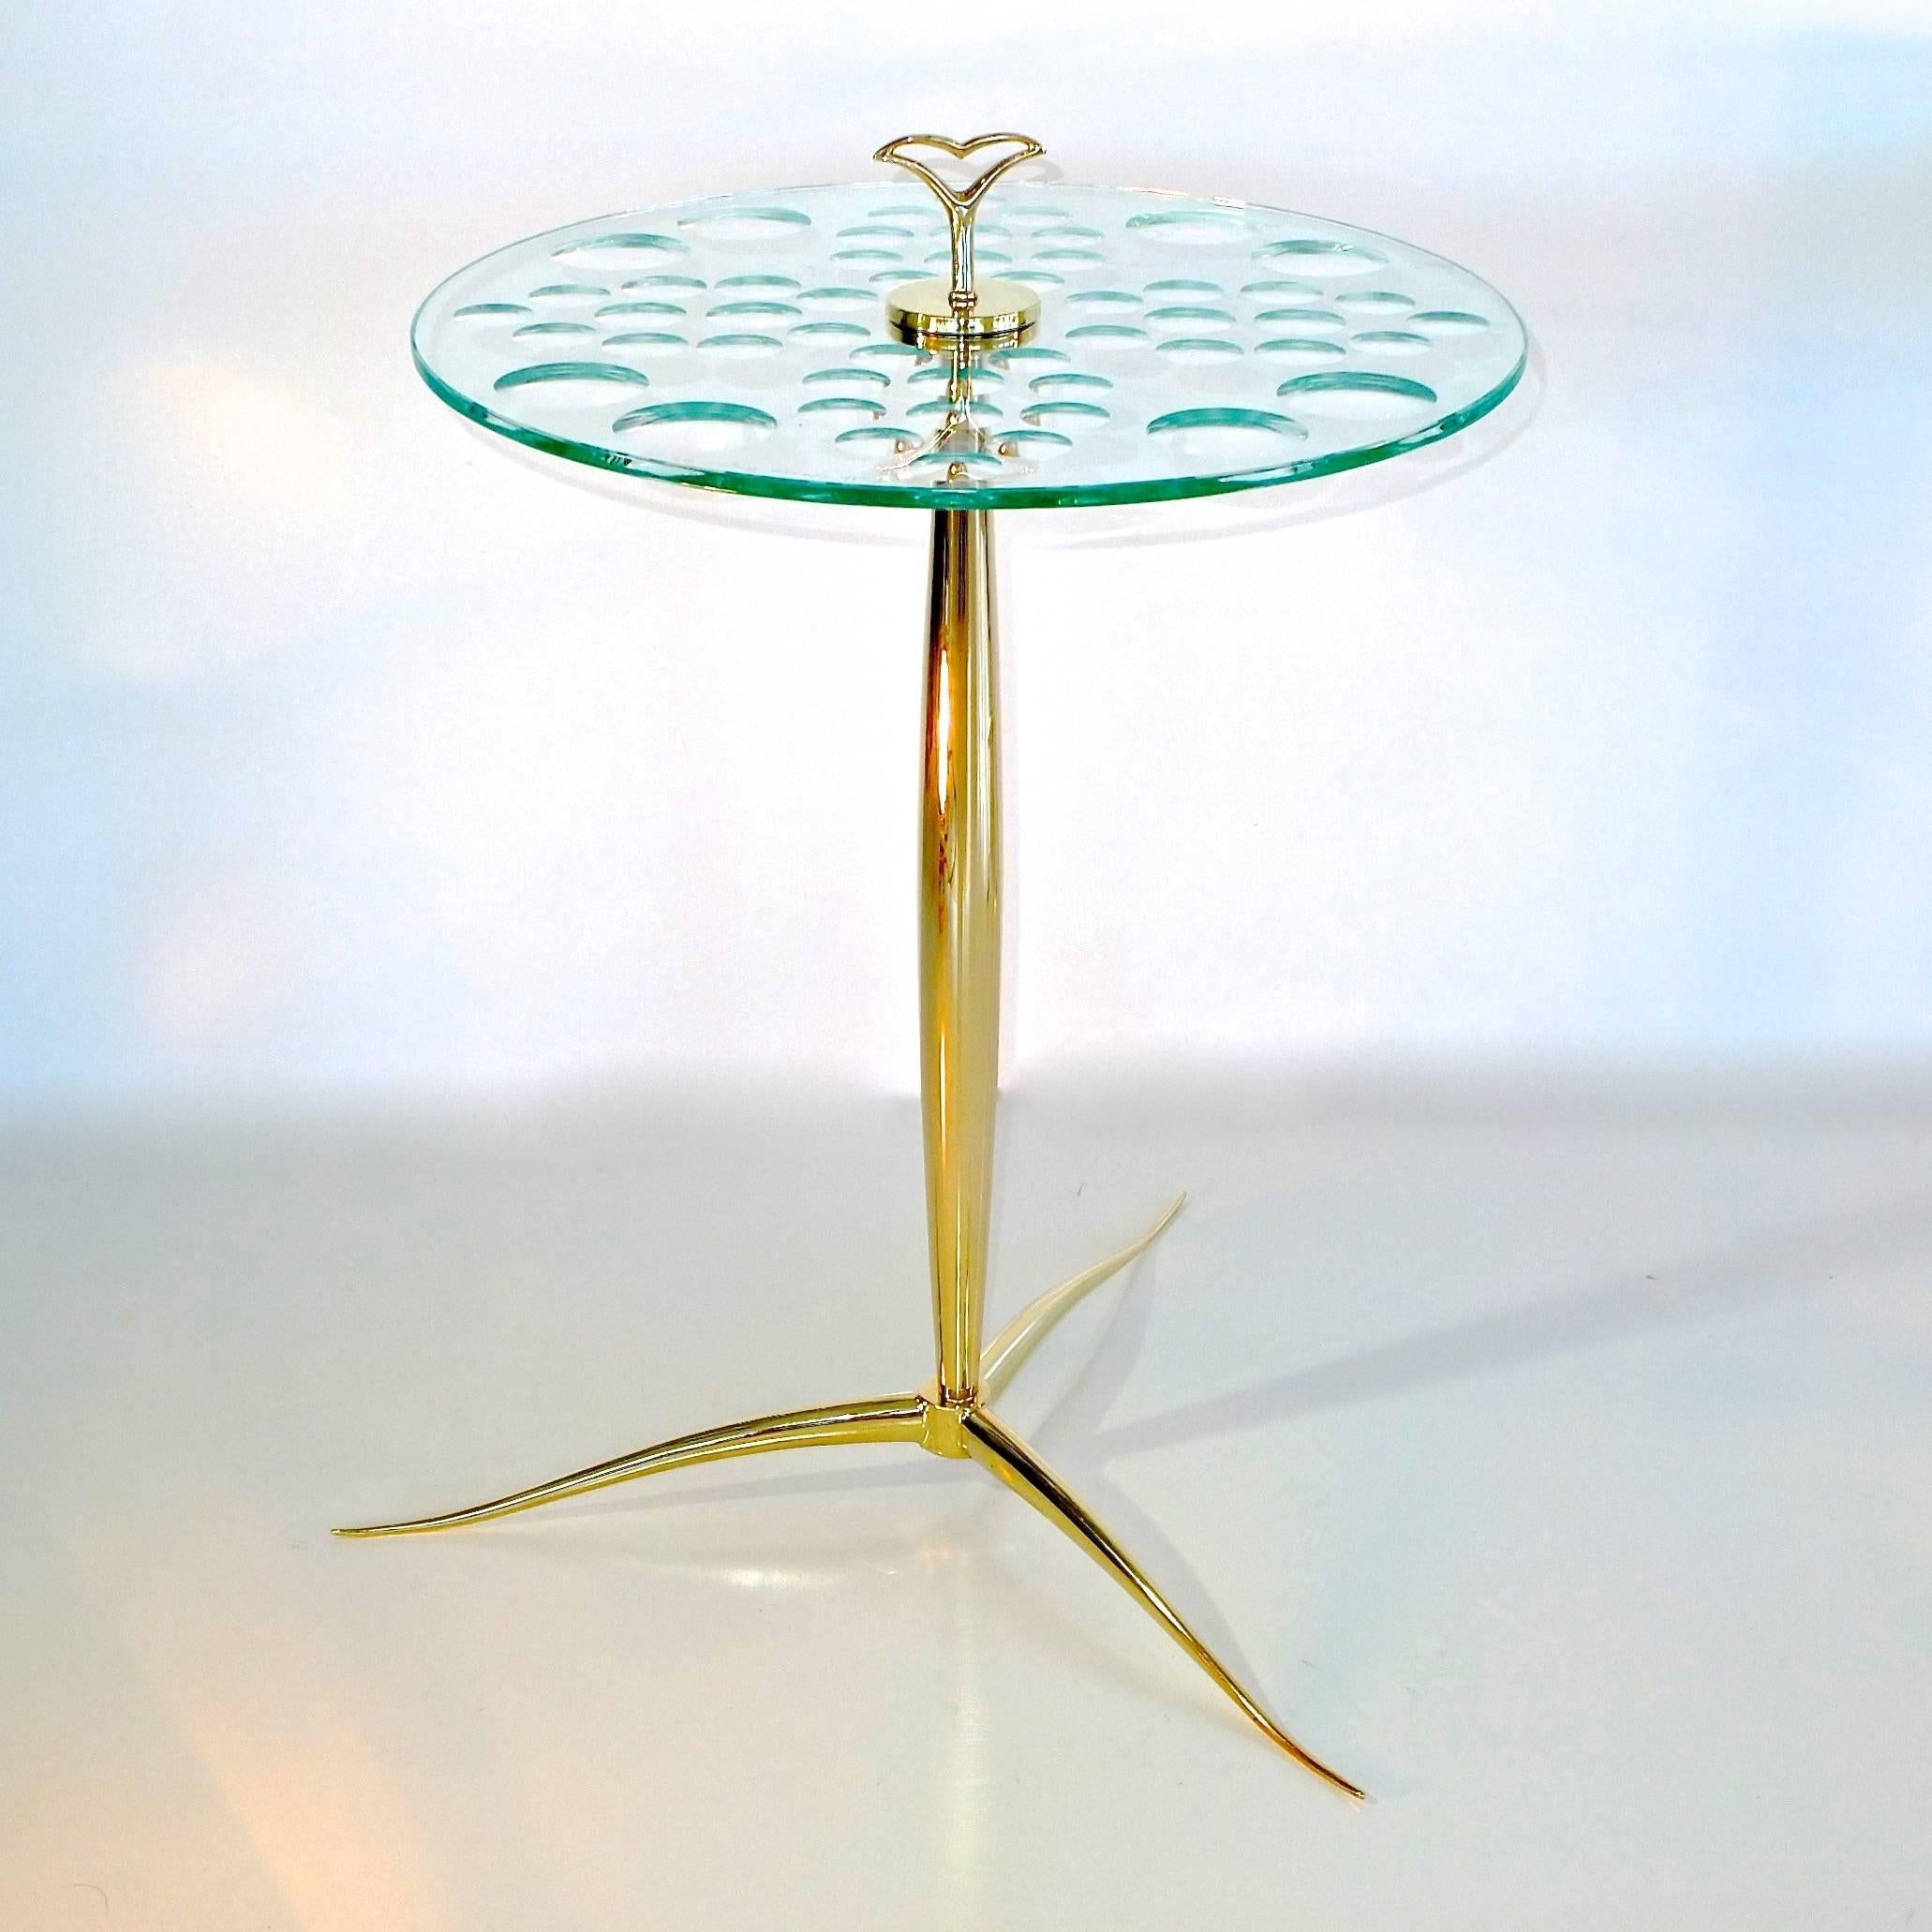 Exclusive limited edition (of two) occasional table custom crafted in the studio workshop of Beyond Gorgeosity, the Nonna table, our own new design created from selected vintage elements, marrying an elegant sinewy Italian solid brass tripod base